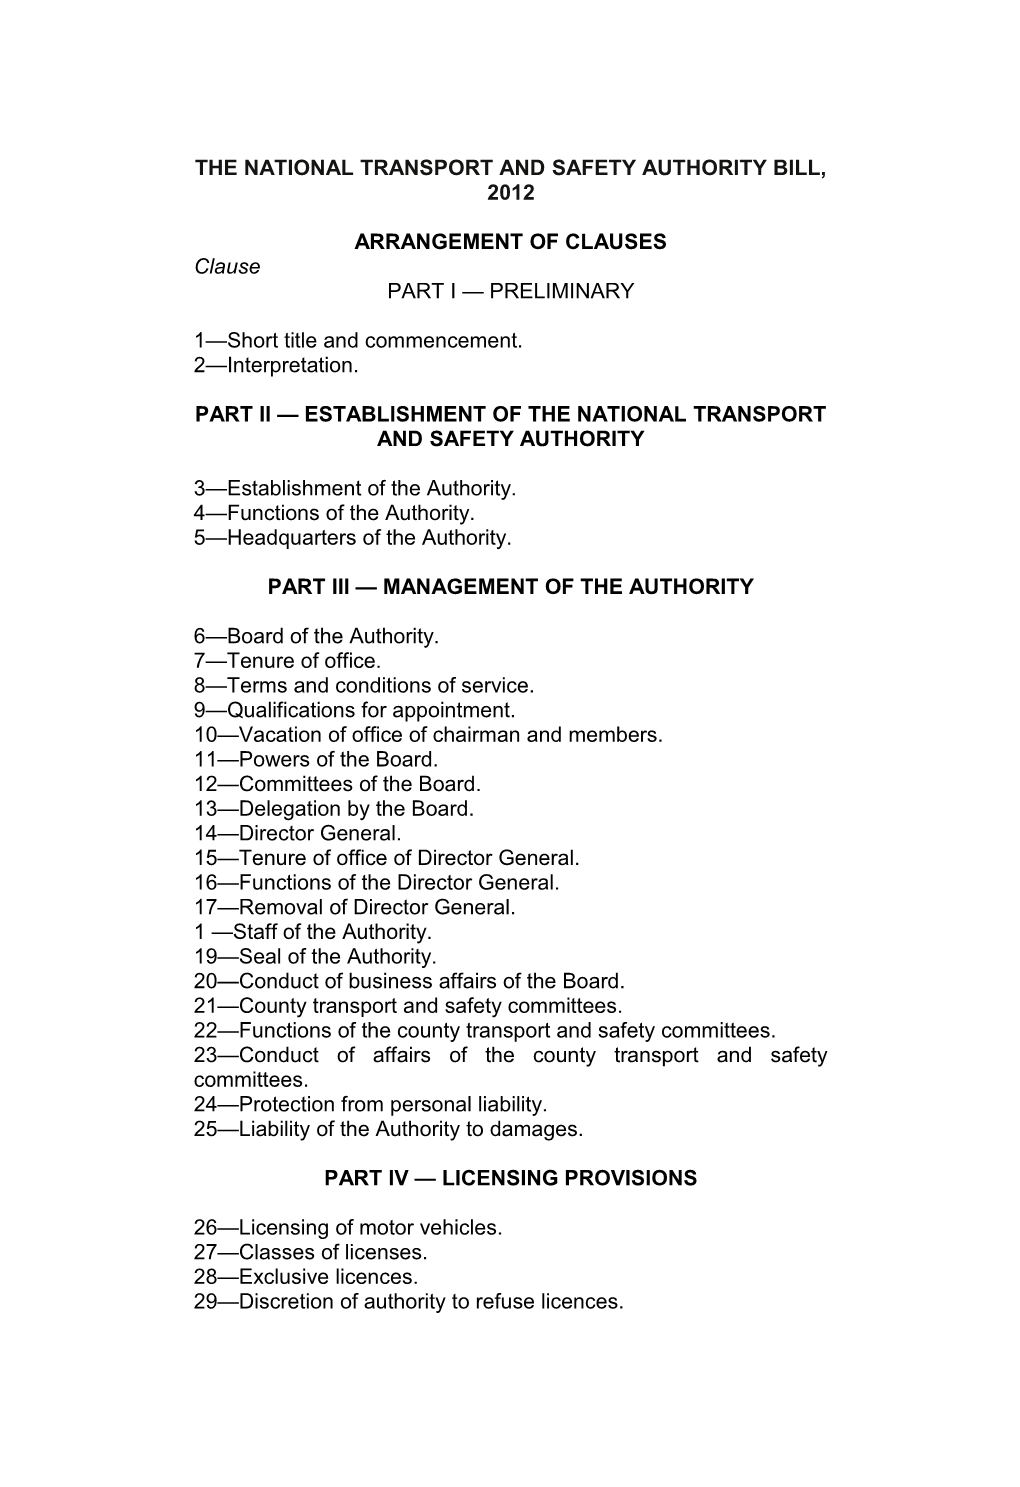 The National Transport and Safety Authority Bill, 2012